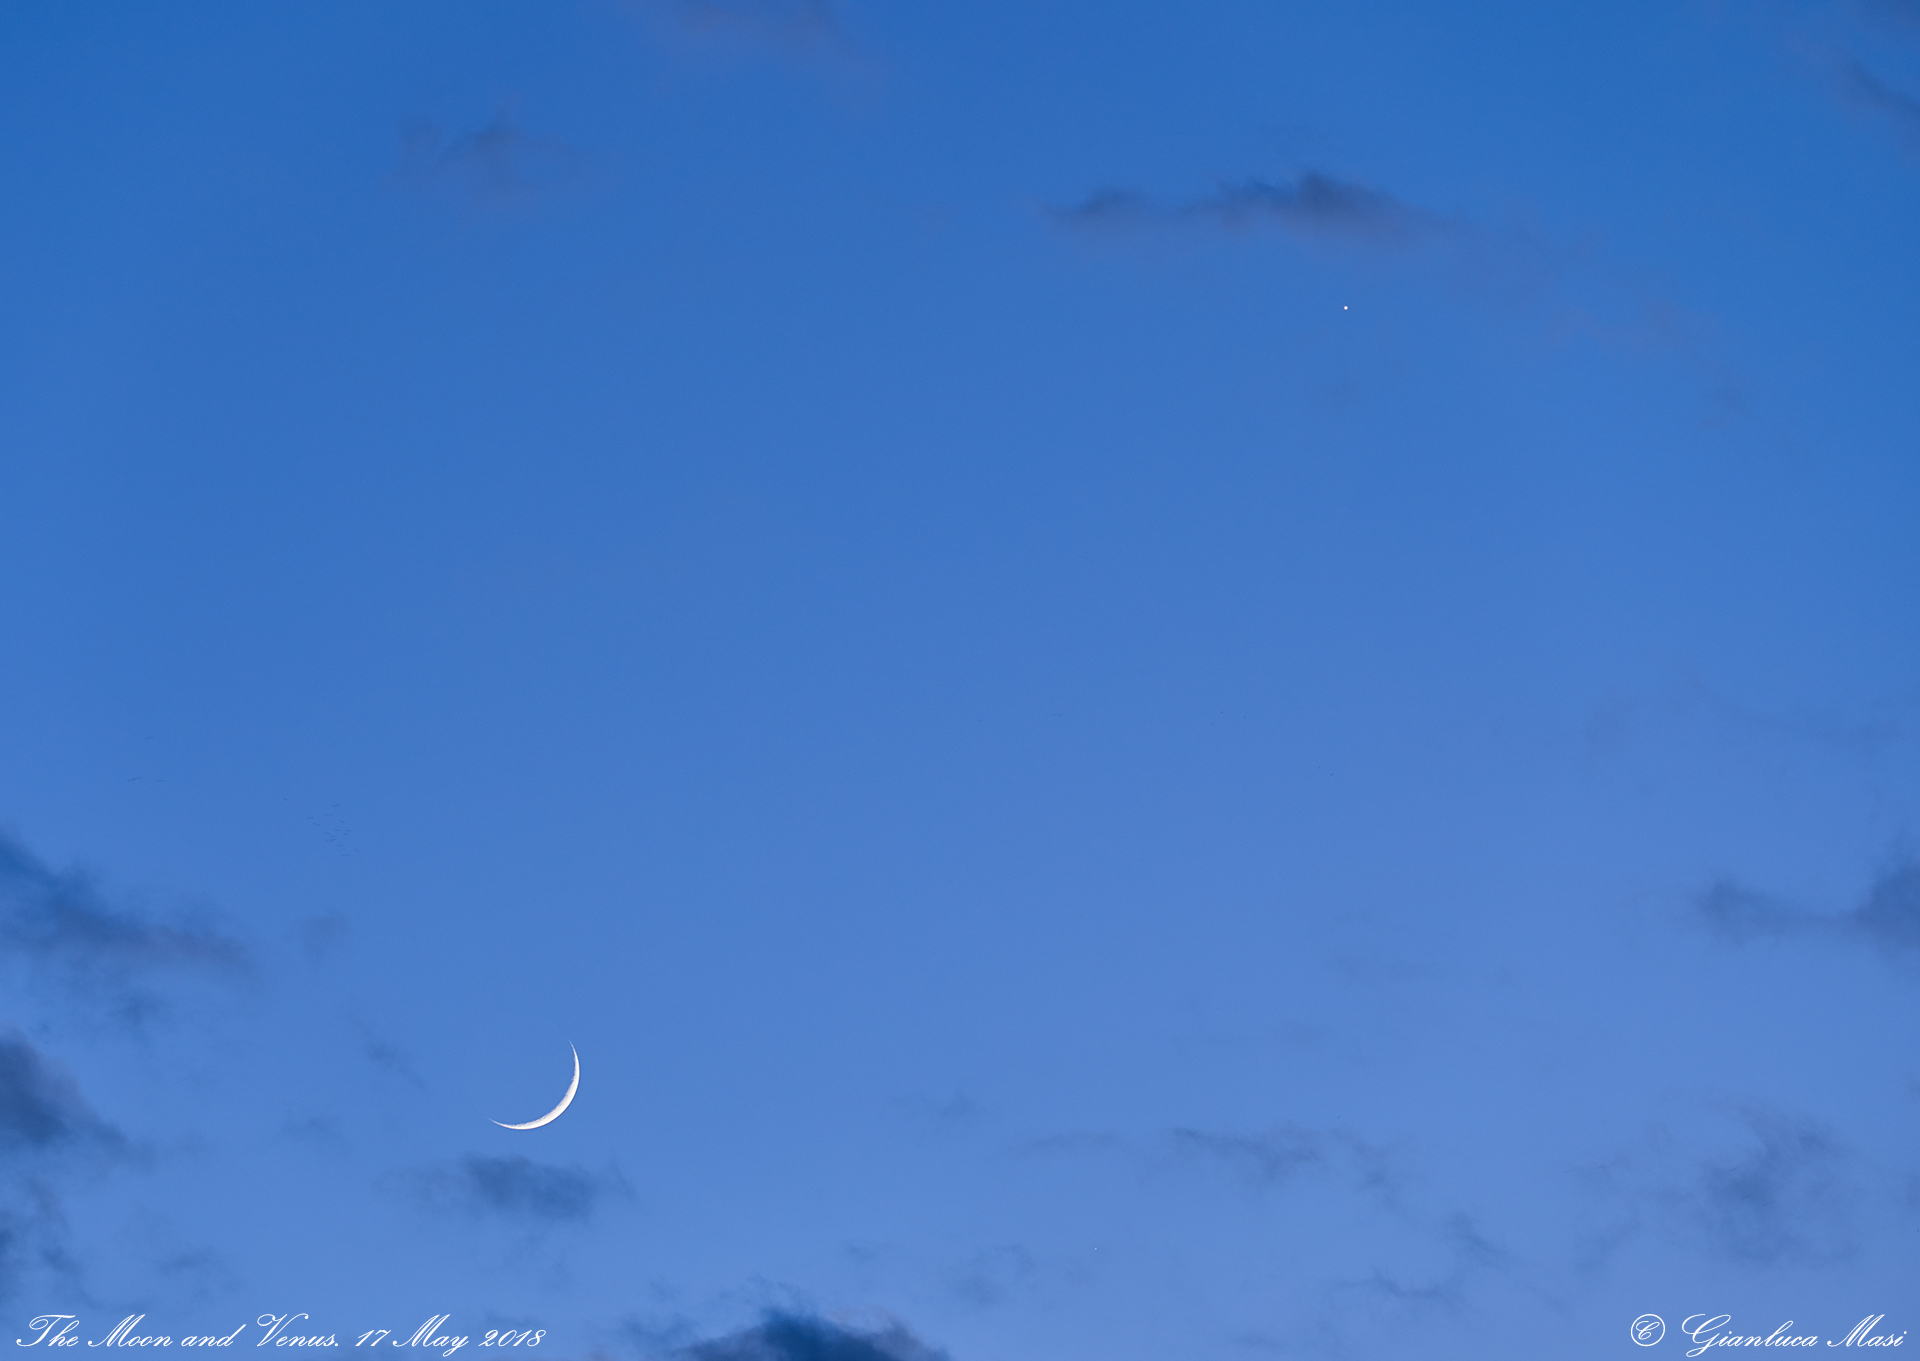 Soon after the sunset, the Moon and Venus appear among gentle clouds